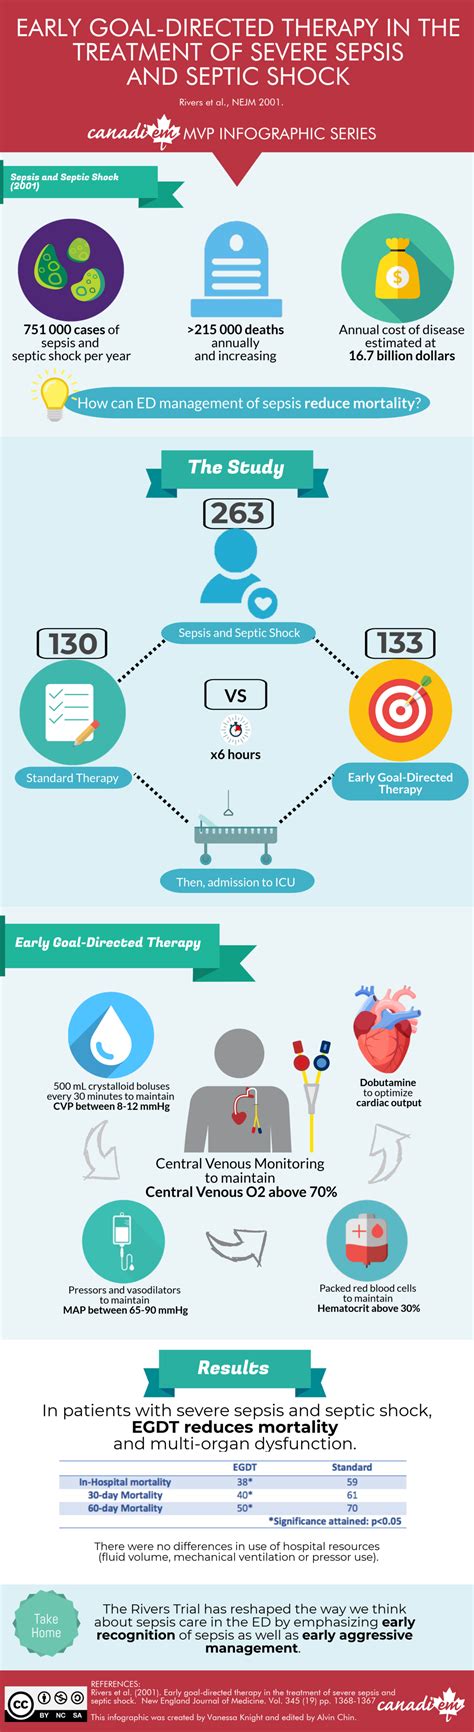 Canadiem Mvp Infographic Series Early Goal Directed Therapy In The